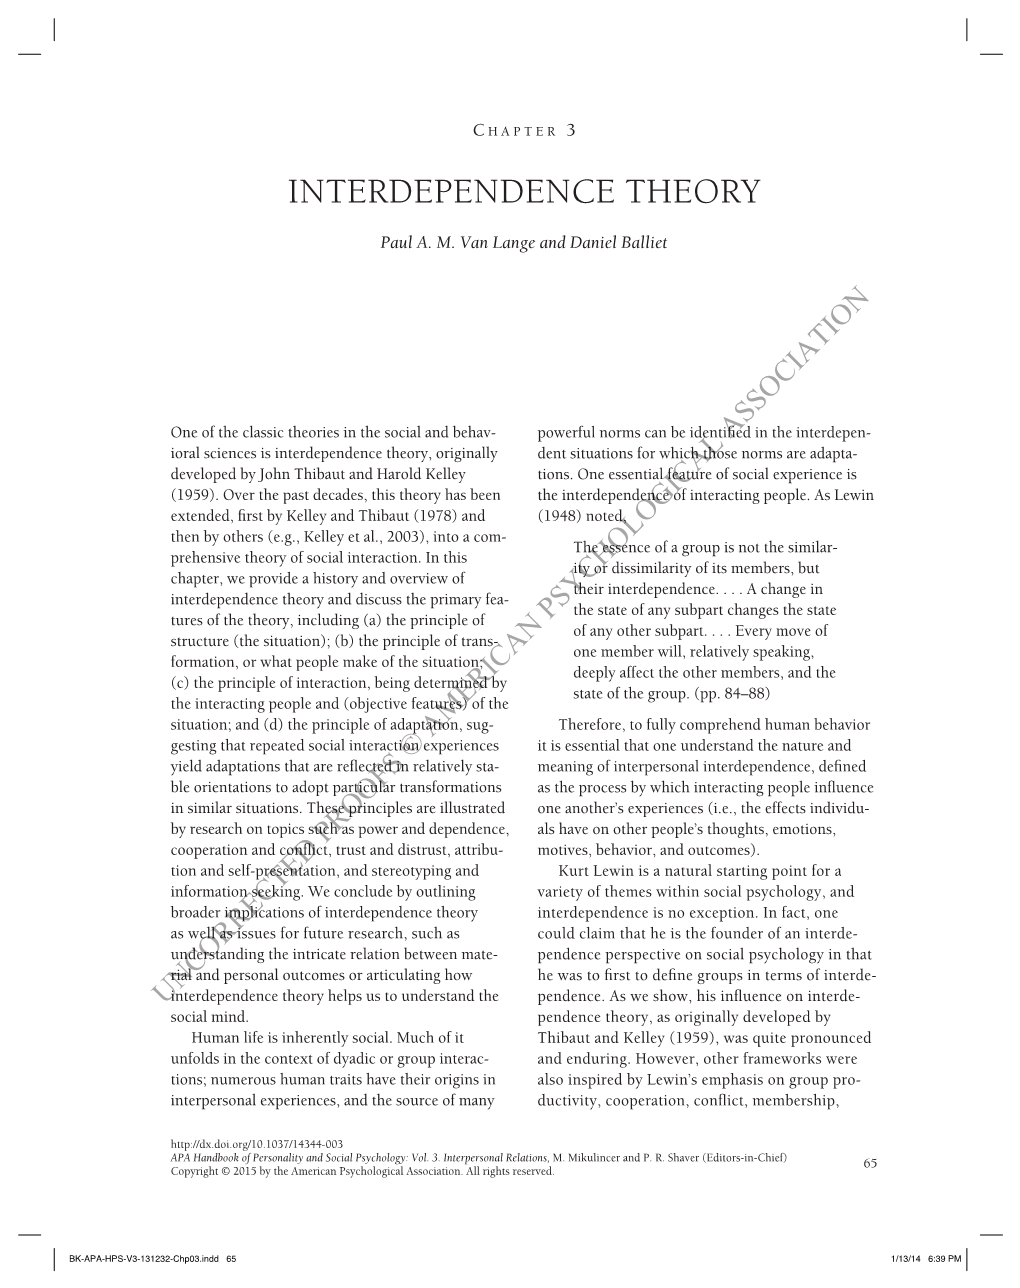 Interdependence Theory